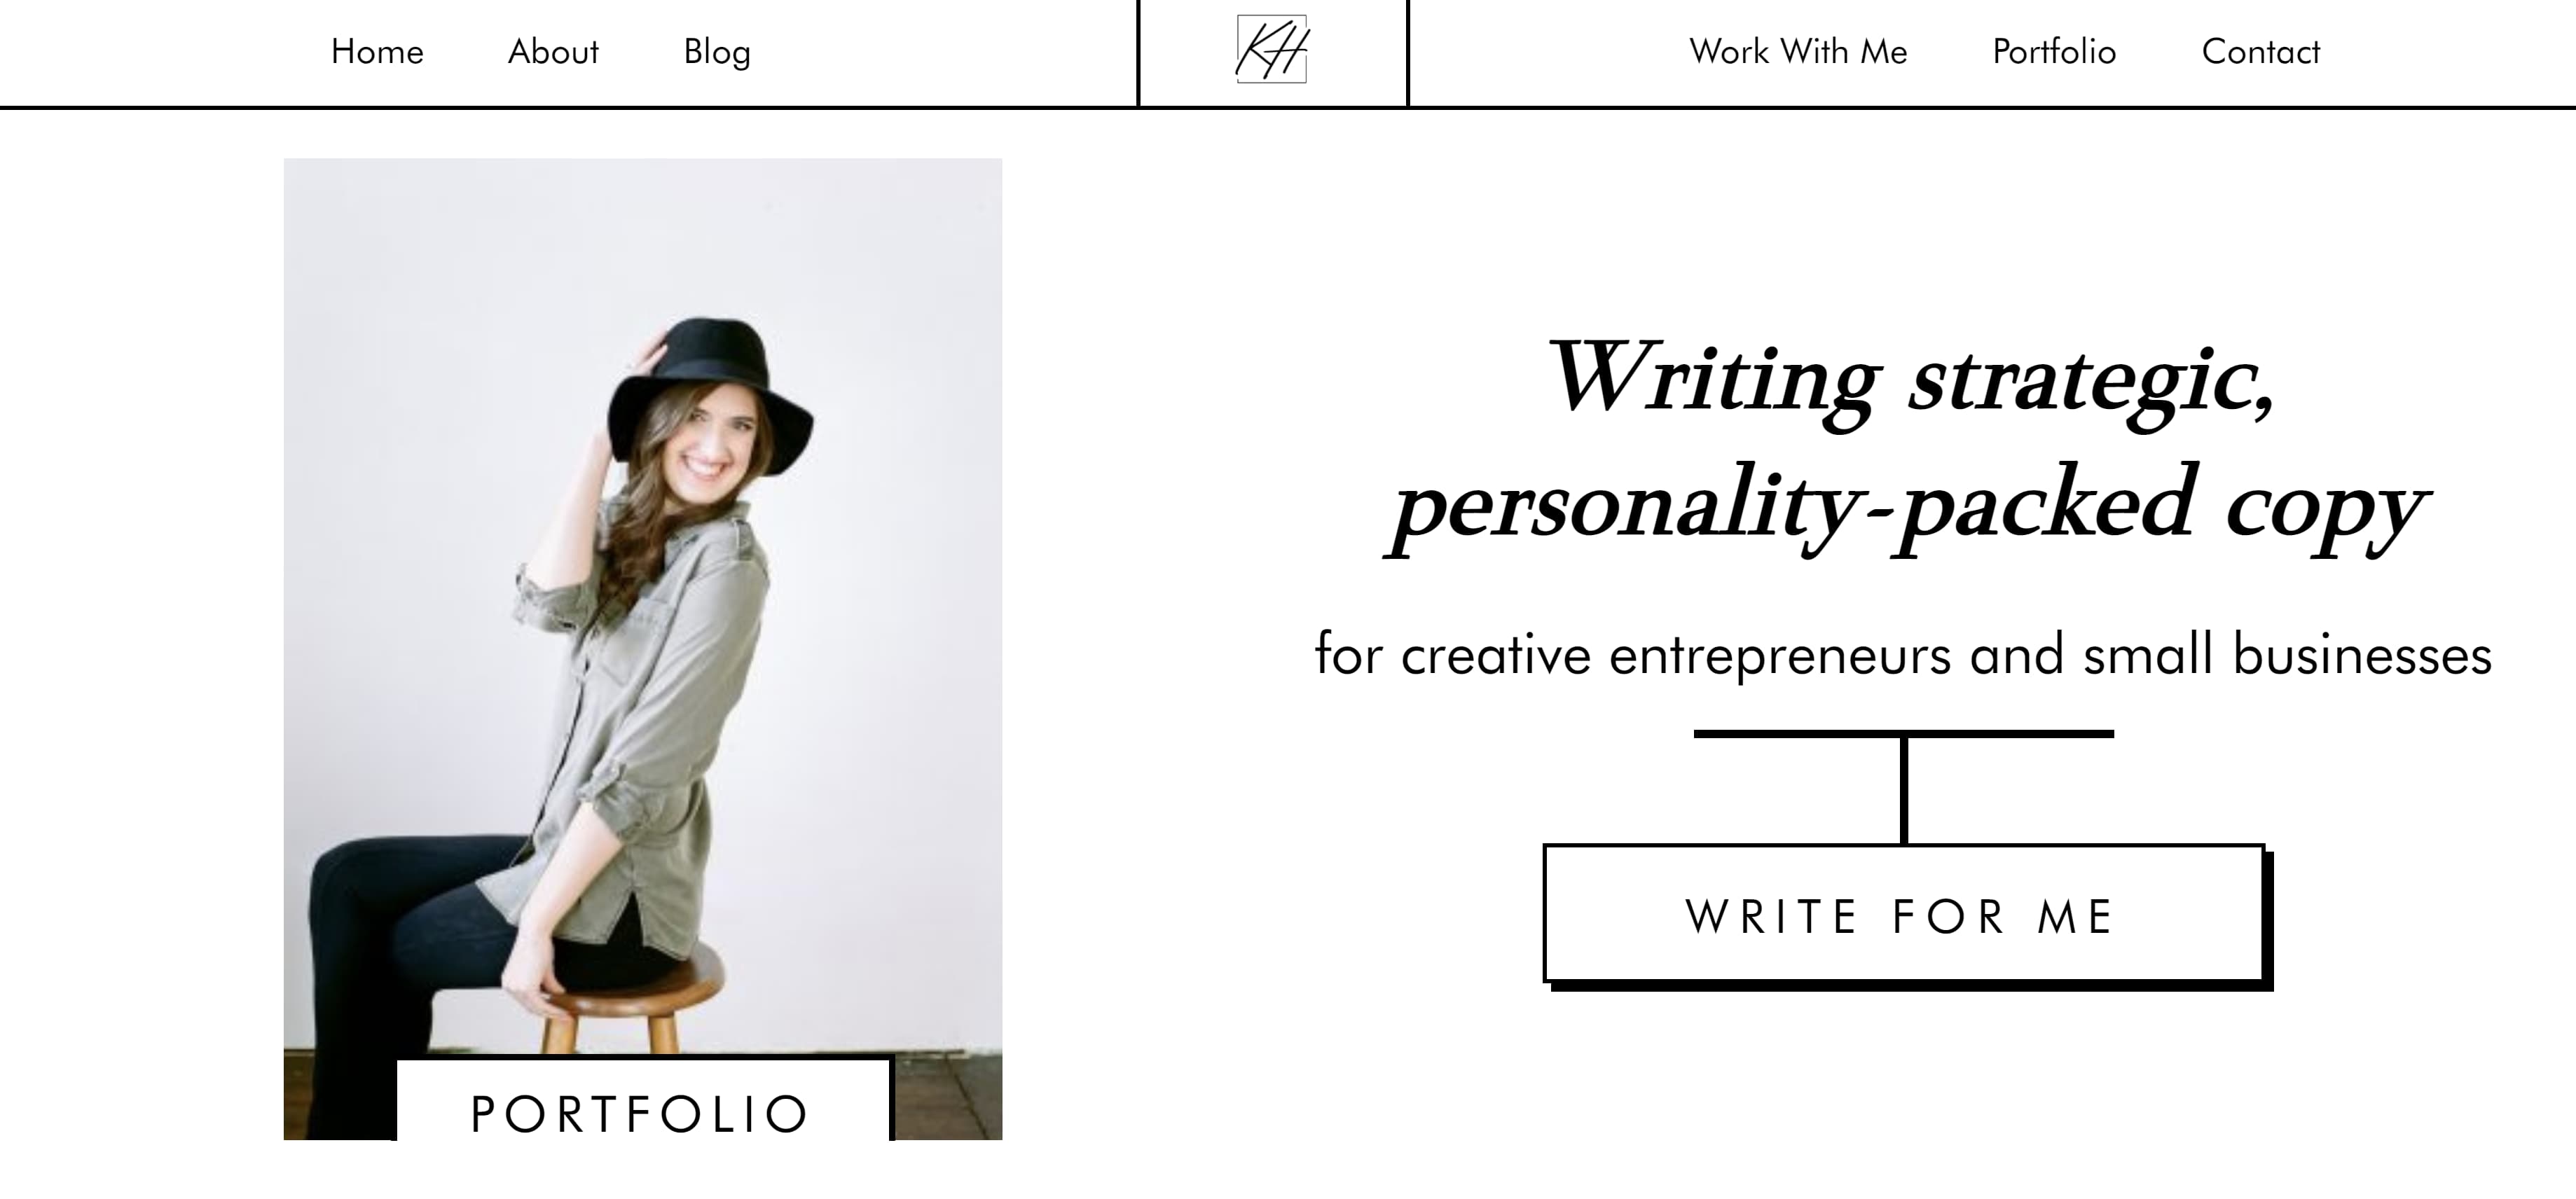 25 Copywriting Portfolio Examples That Will Secure Your Next Gig - HubSpot (Picture 31)